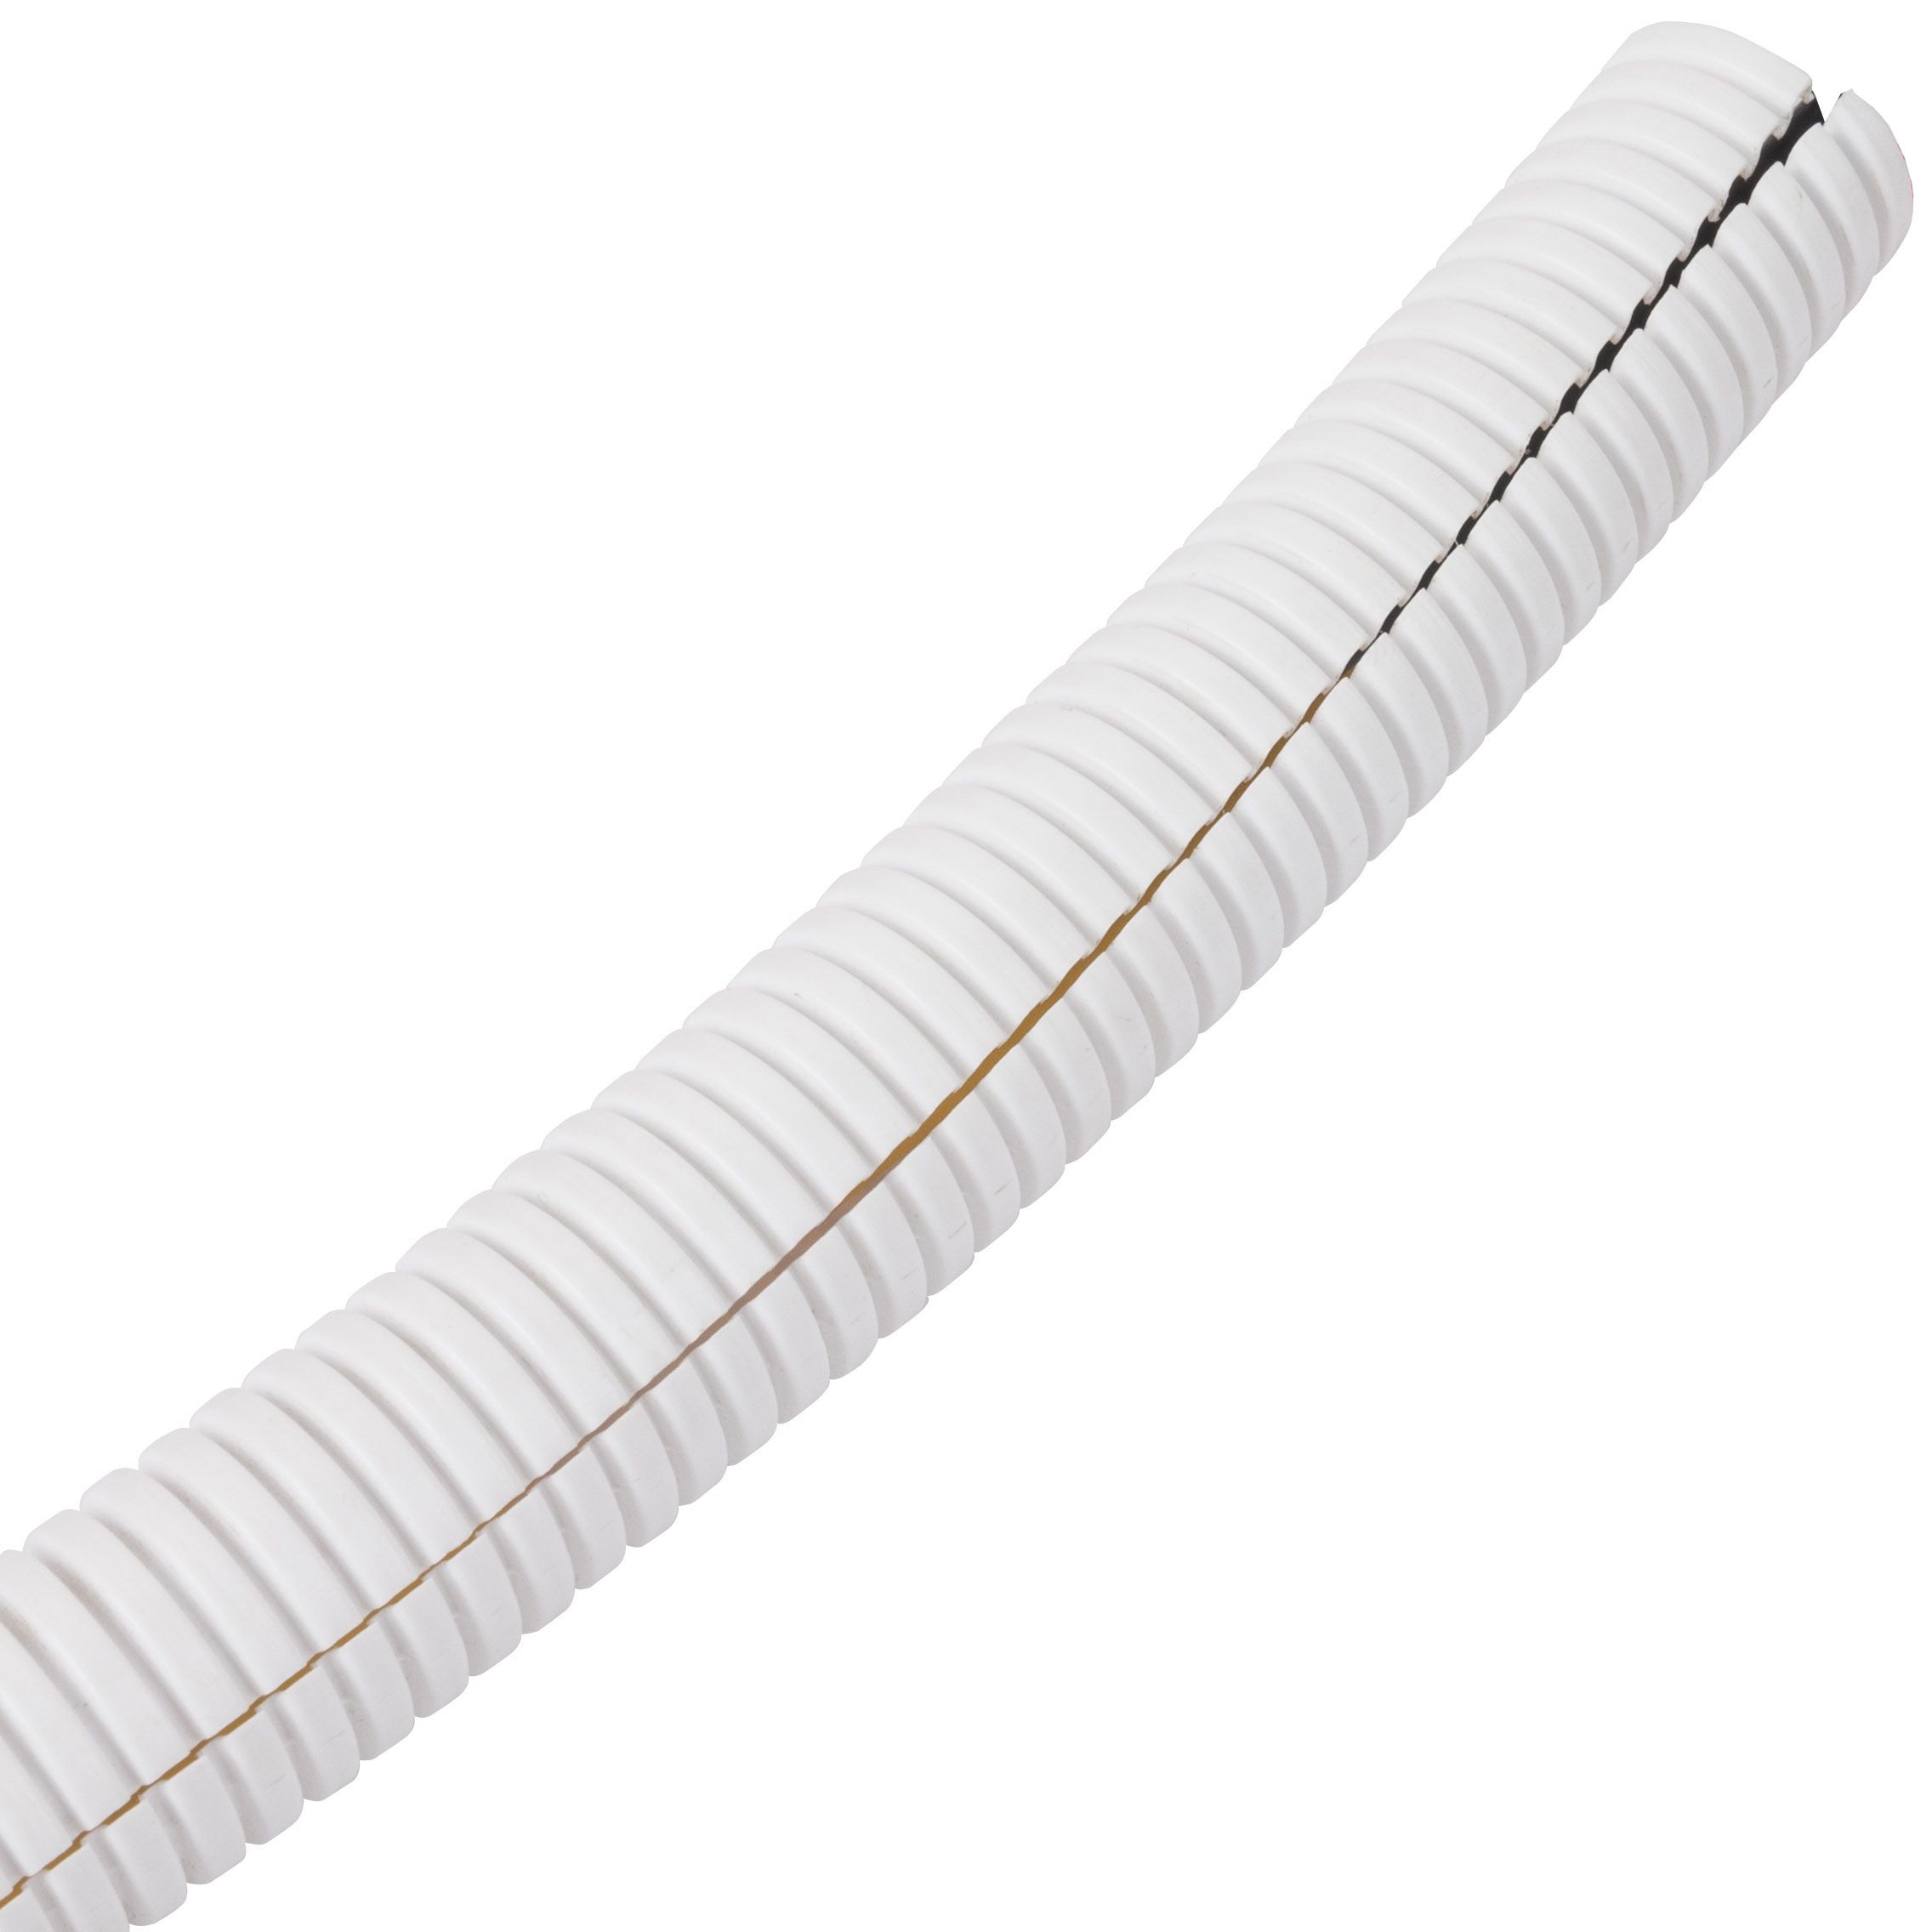 https://media.diy.com/is/image/Kingfisher/d-line-white-6mm-cable-wrap-l-1-1m~5060226644964_01c_bq?$MOB_PREV$&$width=768&$height=768